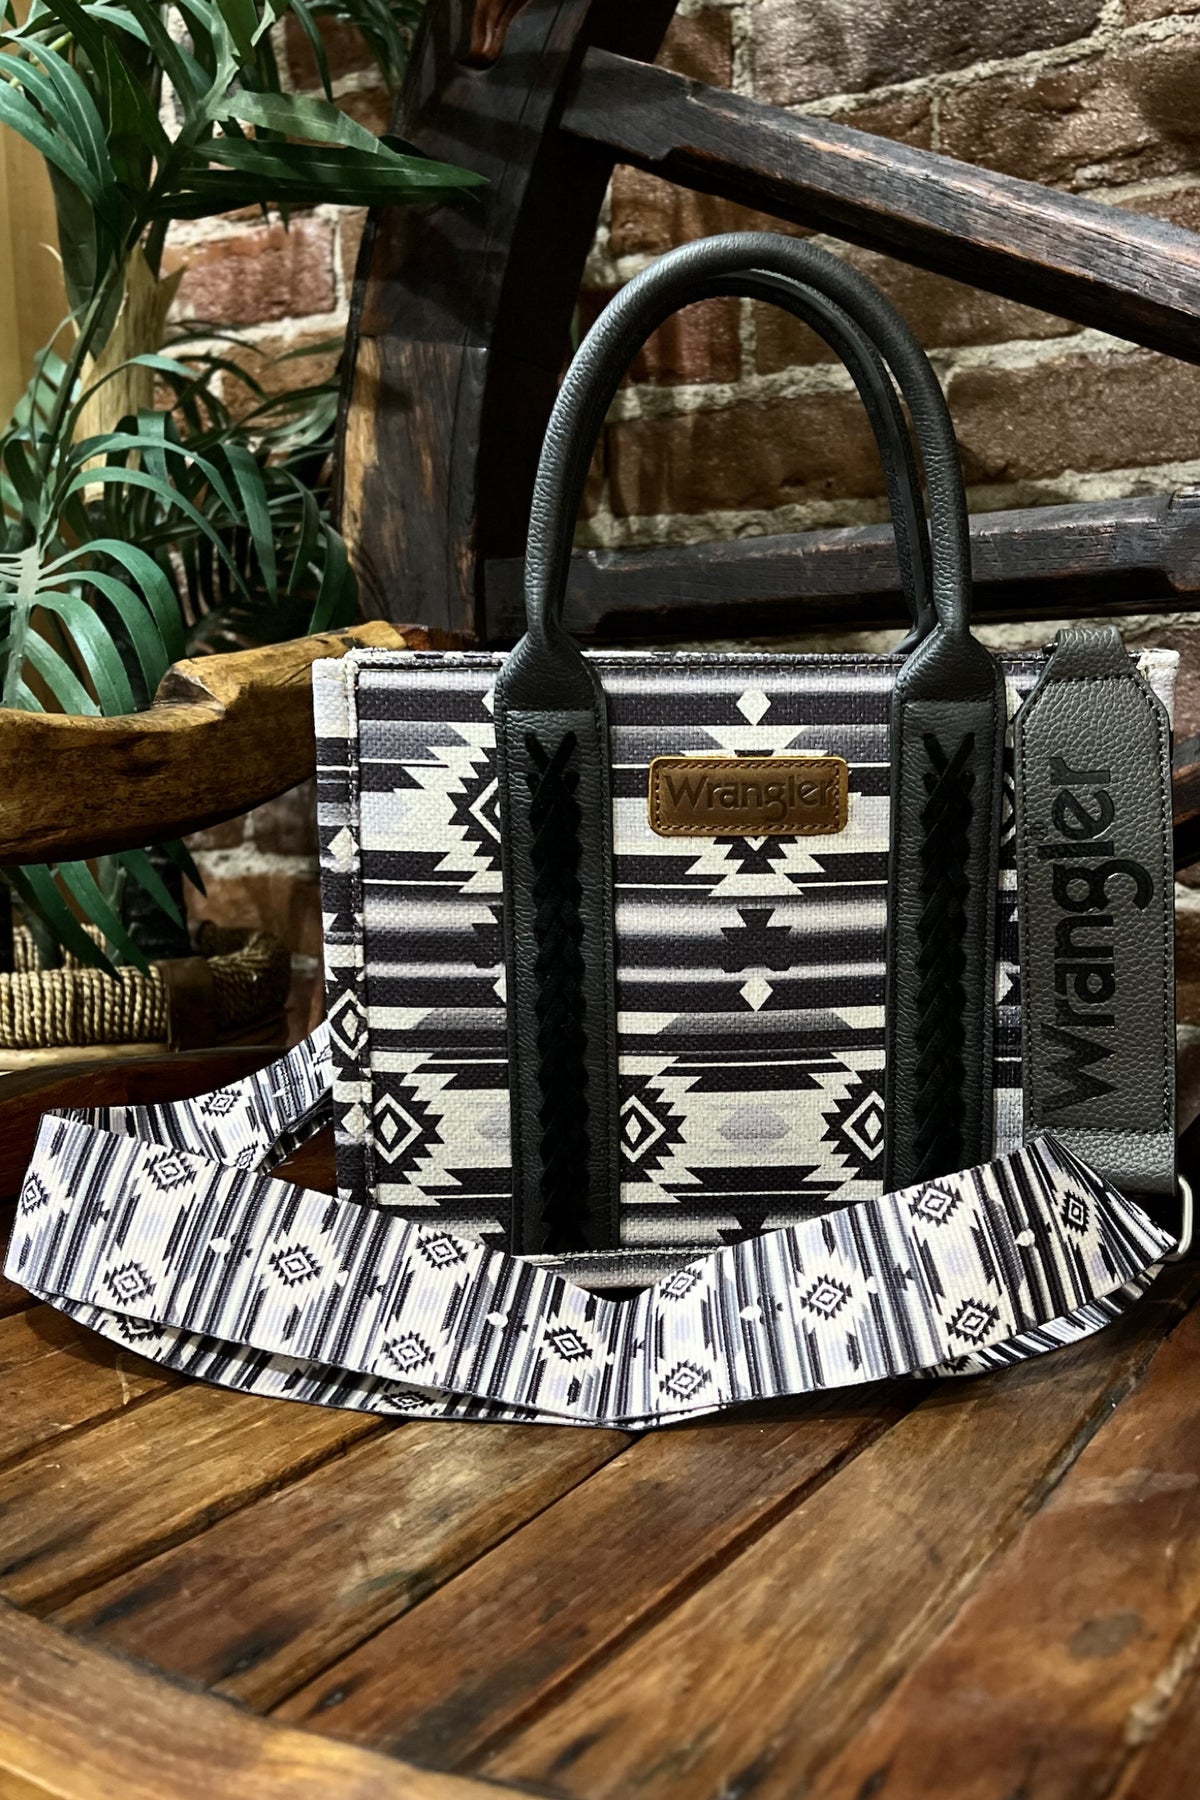 Wrangler Black Allover Aztec Dual Sided Print Crossbody Canvas Tote-Handbags & Accessories-Montana West-Gallop 'n Glitz- Women's Western Wear Boutique, Located in Grants Pass, Oregon